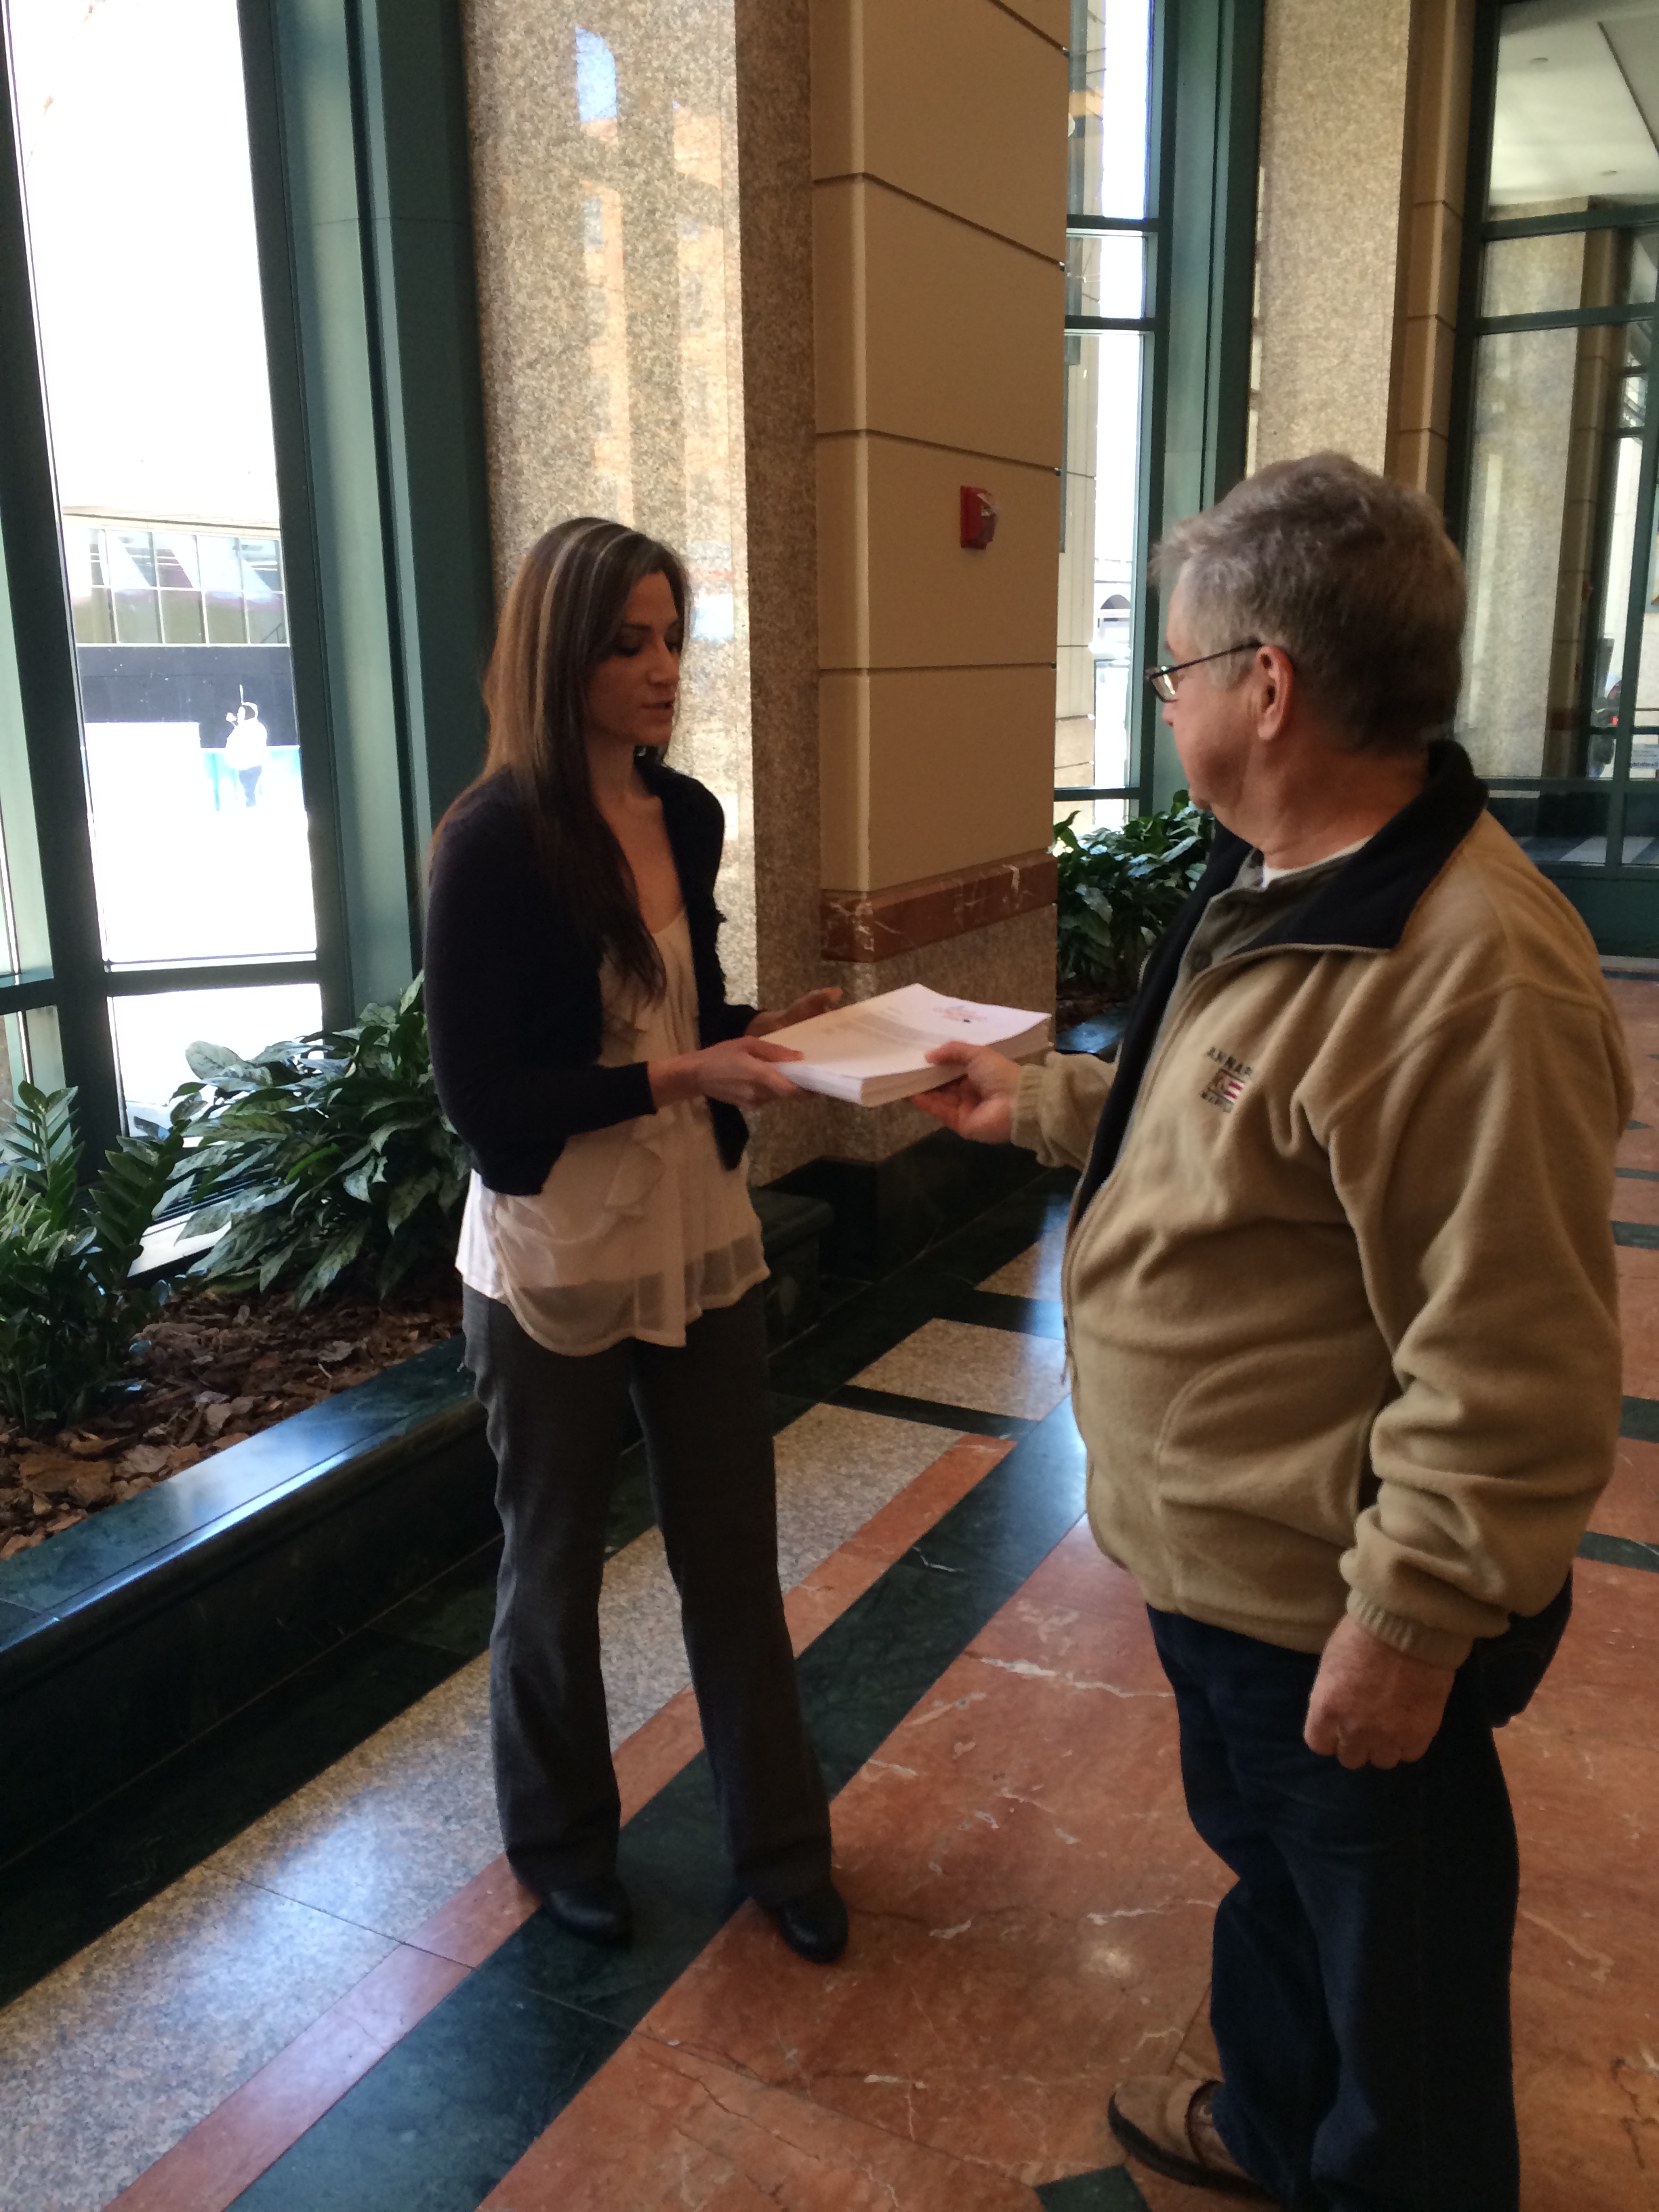 Jan Nethen, Support Conowingo Dam volunteer (right), delivers petition signatures to Sarah Gross, Public Affairs Specialist for the U.S. Army Corps of Engineers (left). 